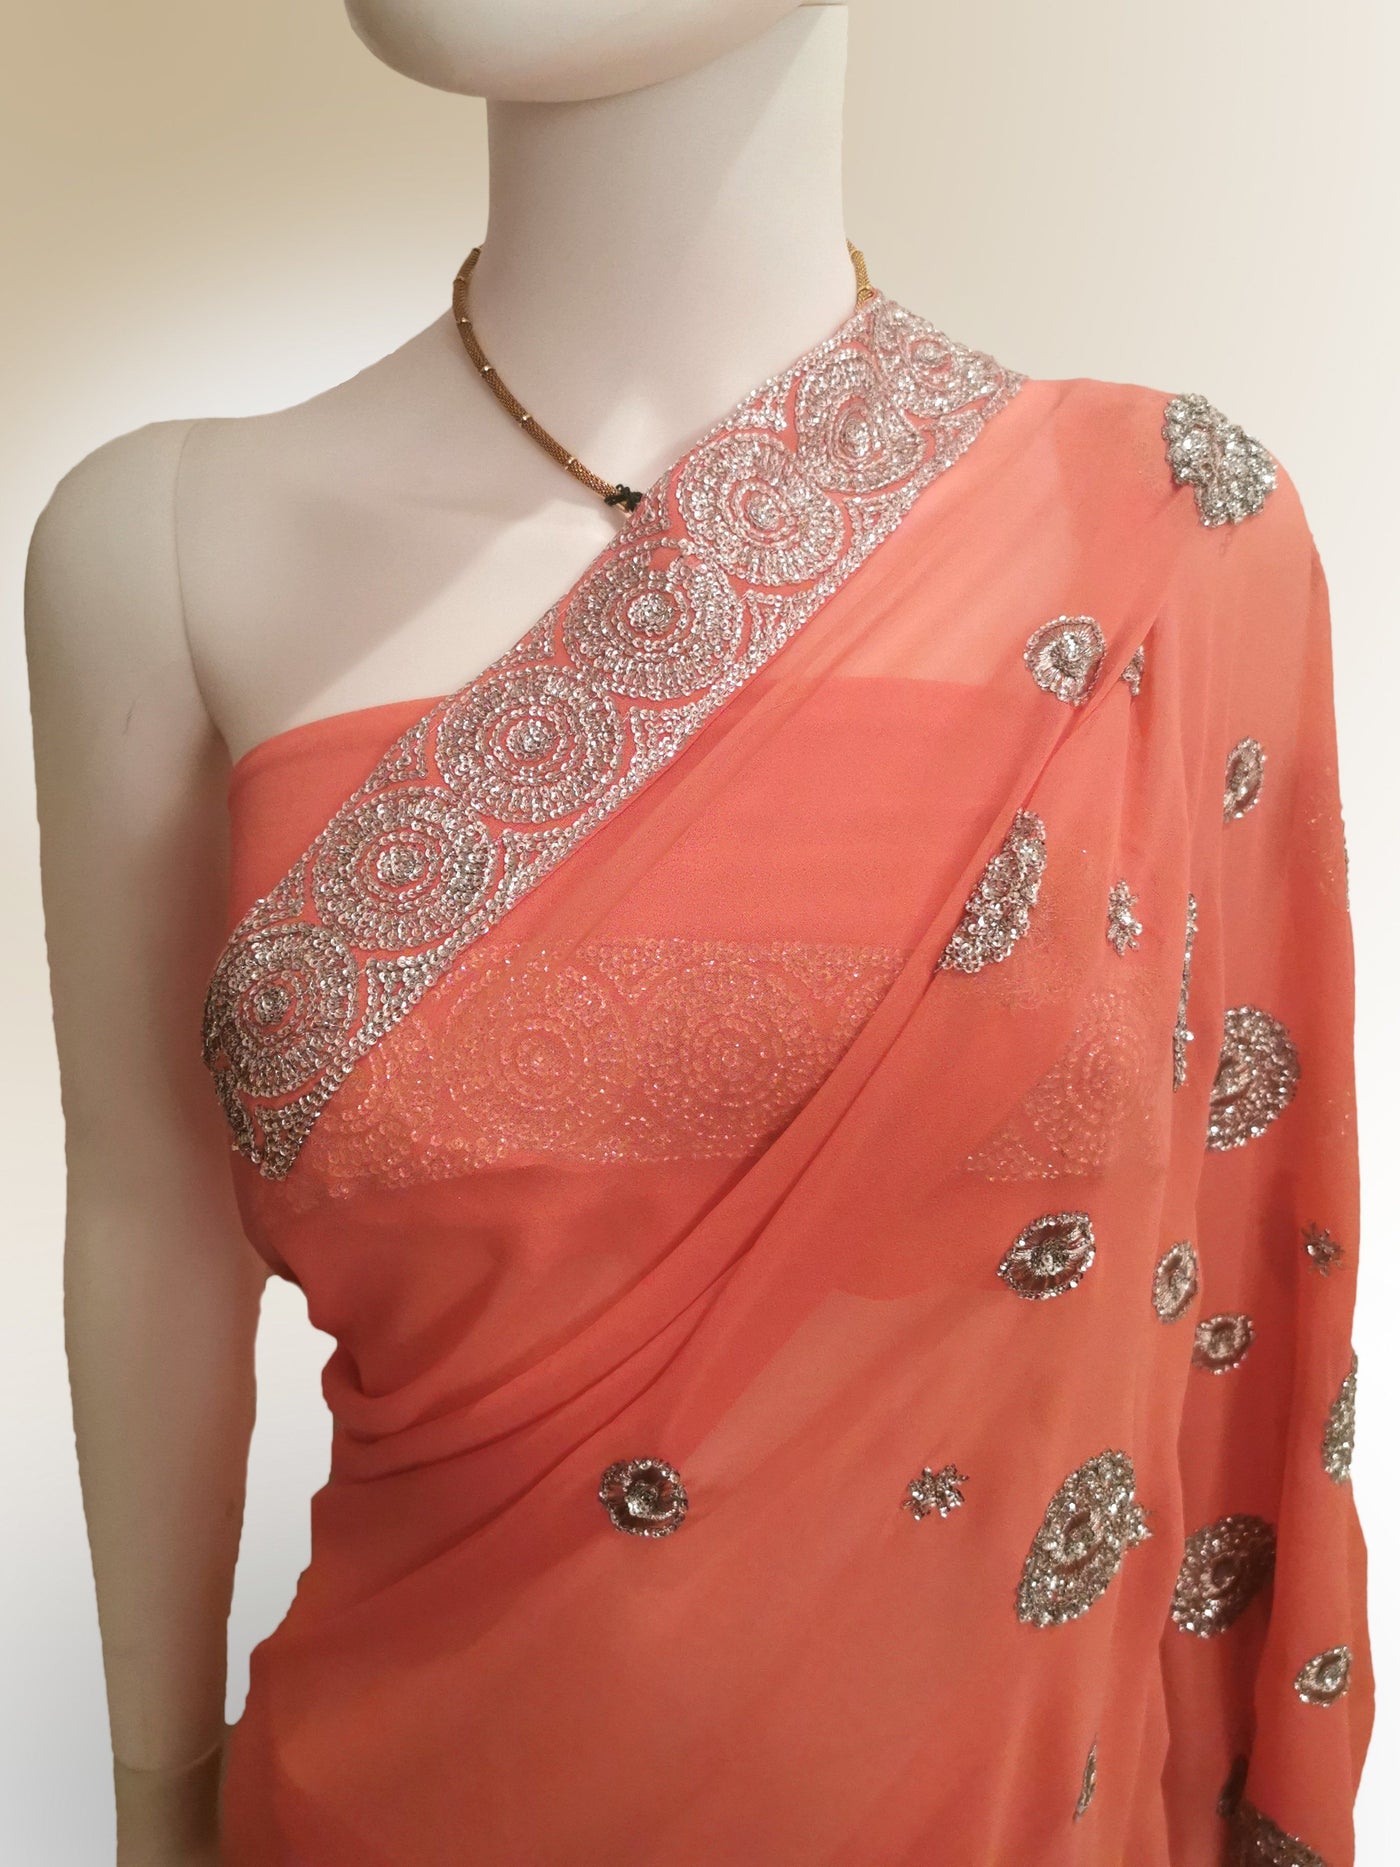 Saree in Vibrant Salmon Pink Pure Georgette - Indian Clothing in Denver, CO, Aurora, CO, Boulder, CO, Fort Collins, CO, Colorado Springs, CO, Parker, CO, Highlands Ranch, CO, Cherry Creek, CO, Centennial, CO, and Longmont, CO. Nationwide shipping USA - India Fashion X